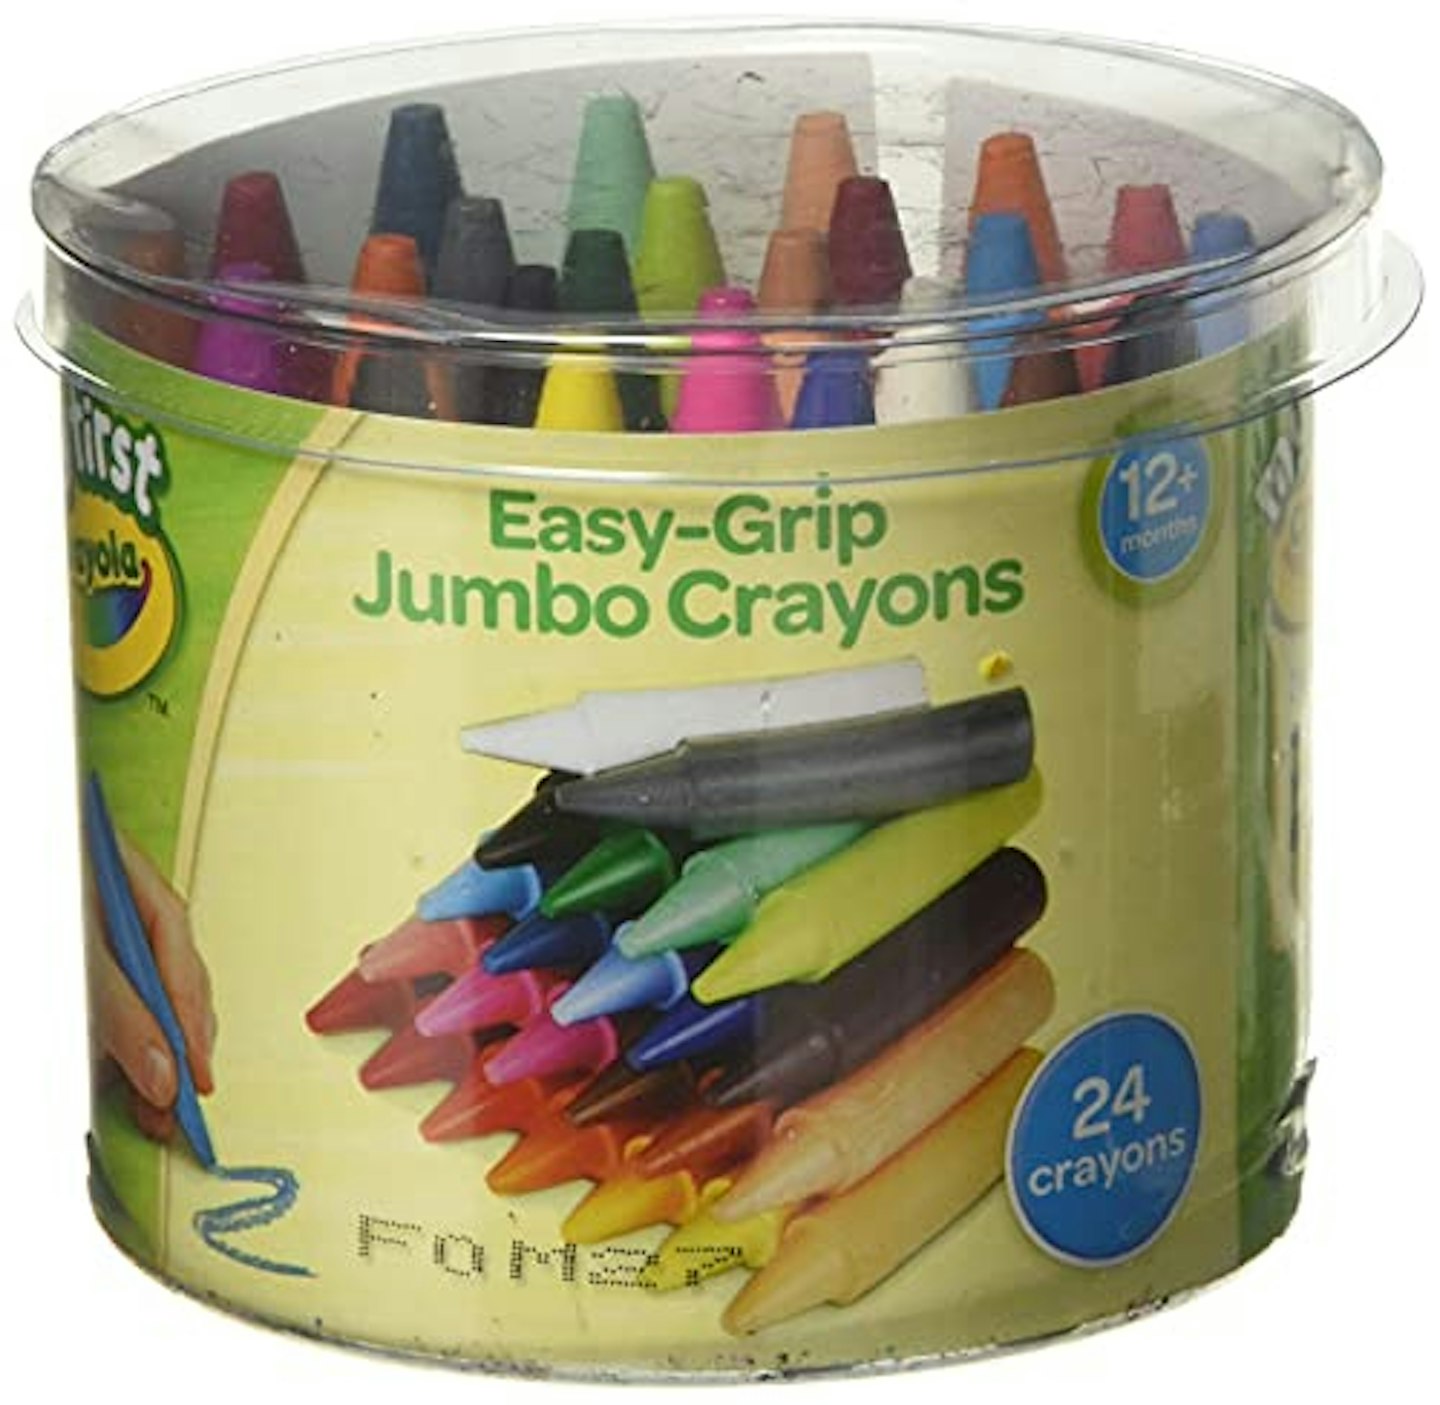  Honeysticks Jumbo Crayons (16 Pack) - Non Toxic Crayons for  Kids - 100% Pure Beeswax and Food Grade Colors - 16 Bright Colors - Large  Crayons, Easy to Hold and Use 